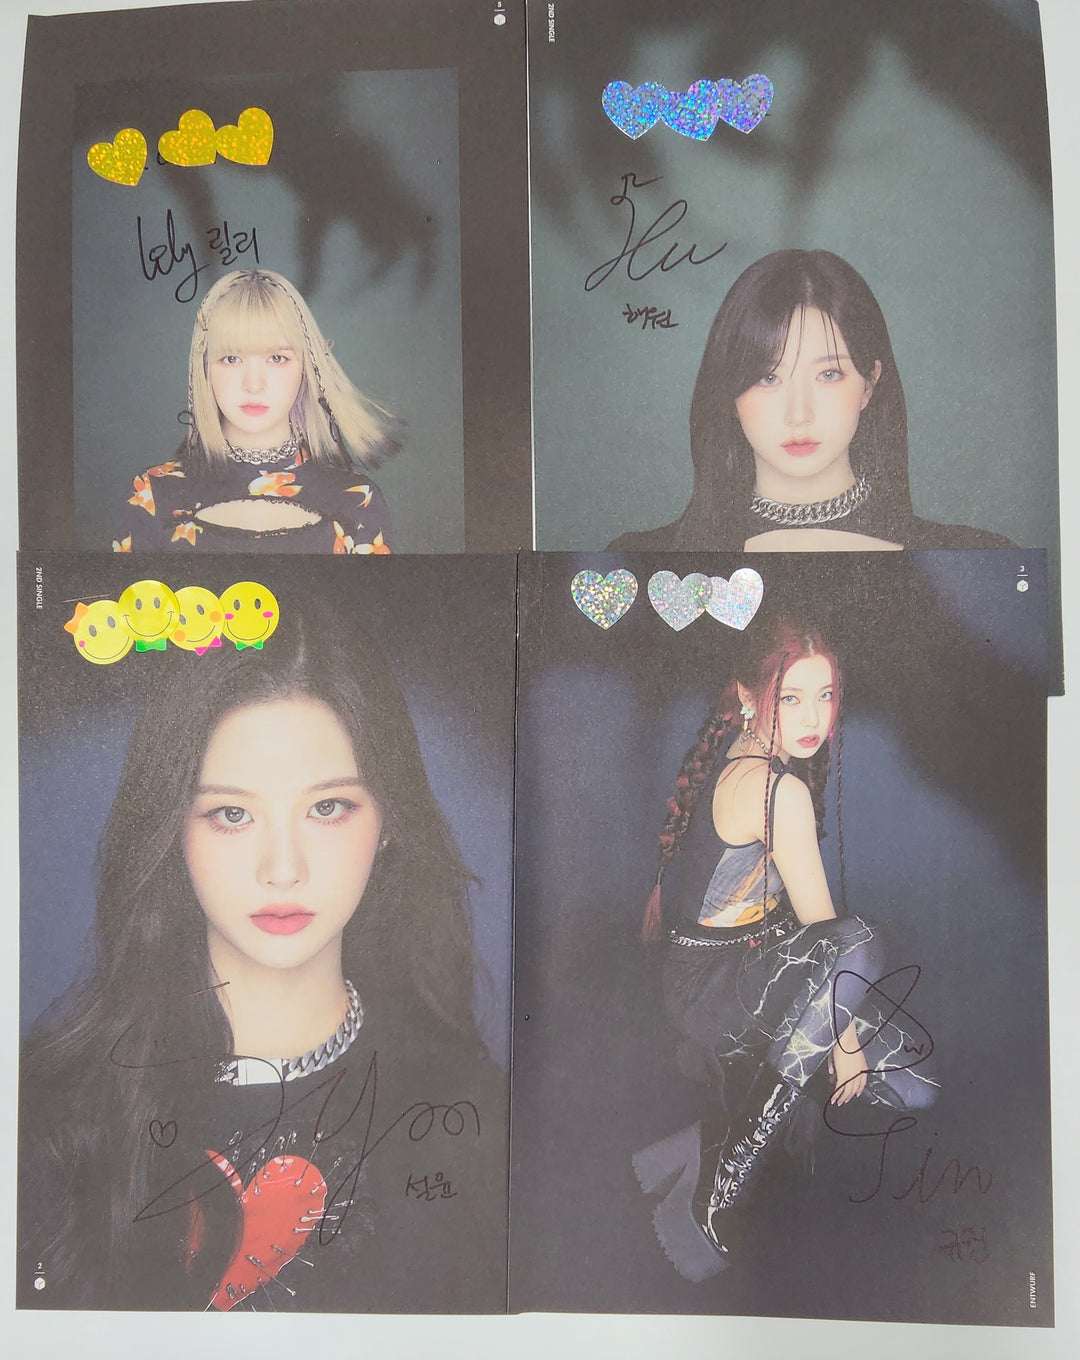 NMIXX "ENTWURF" - A Cut Page From Fansign Event Album